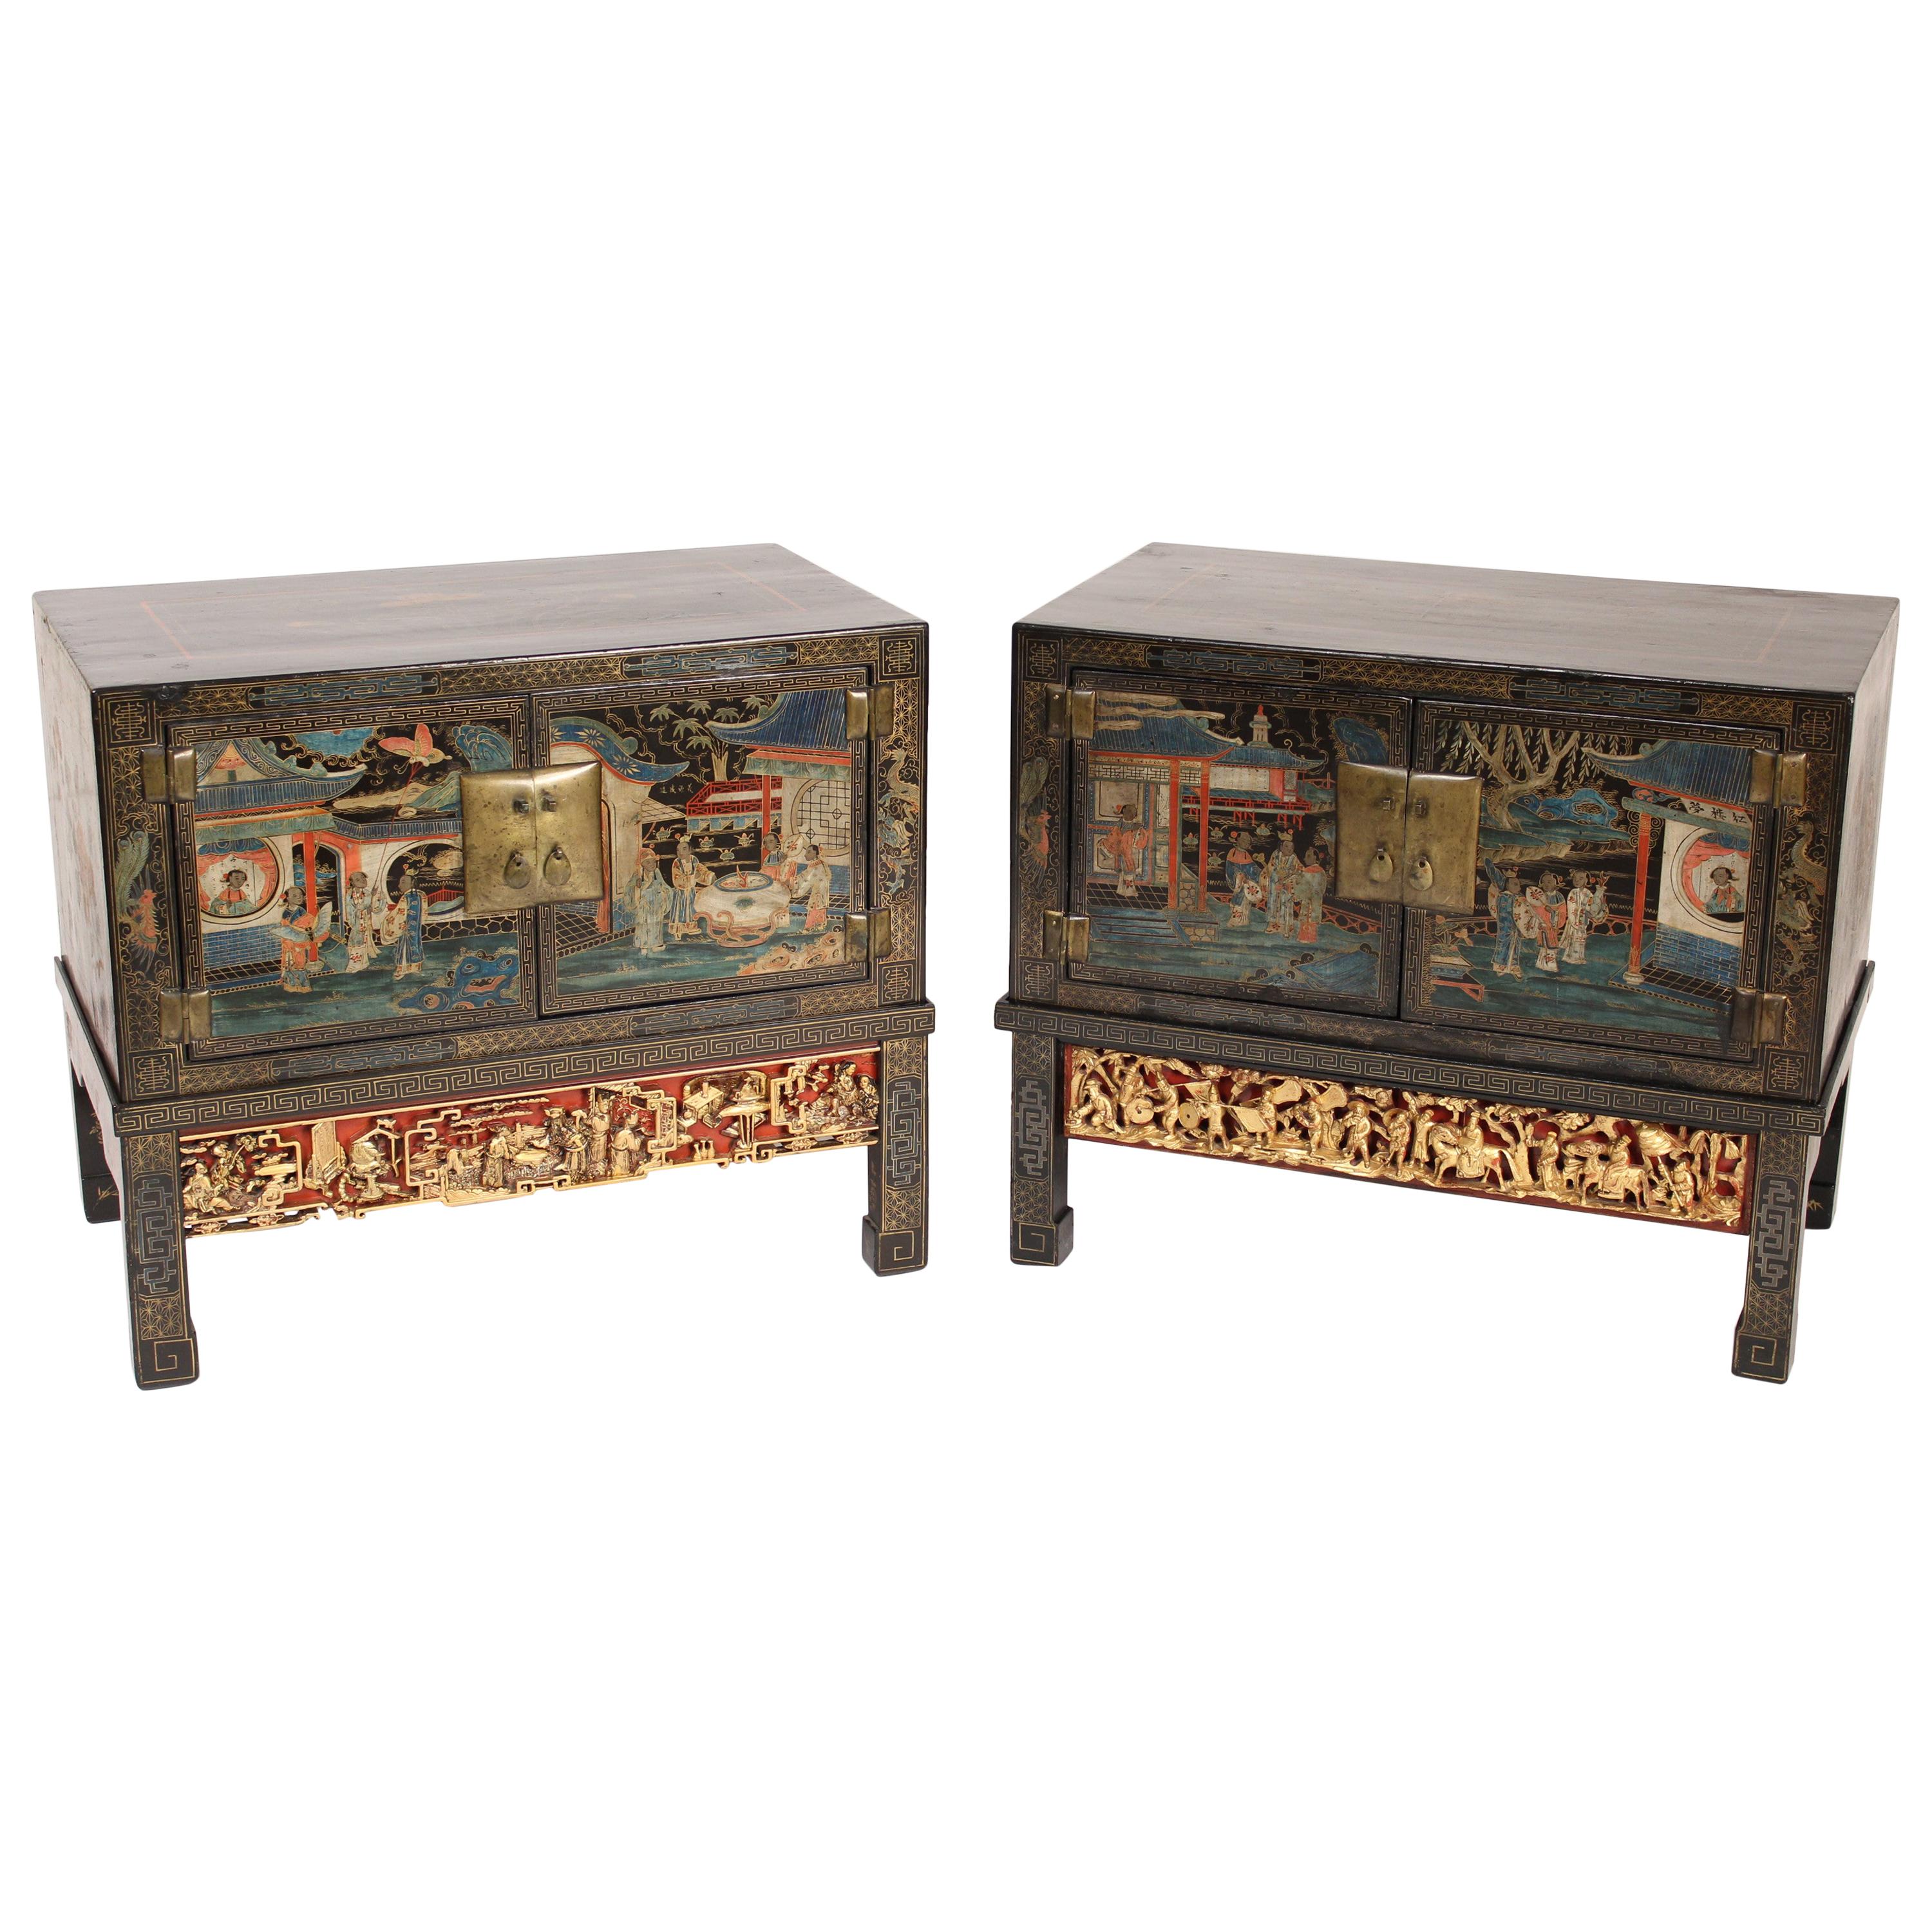 Pair of Chinese Painted Cabinets on Stands